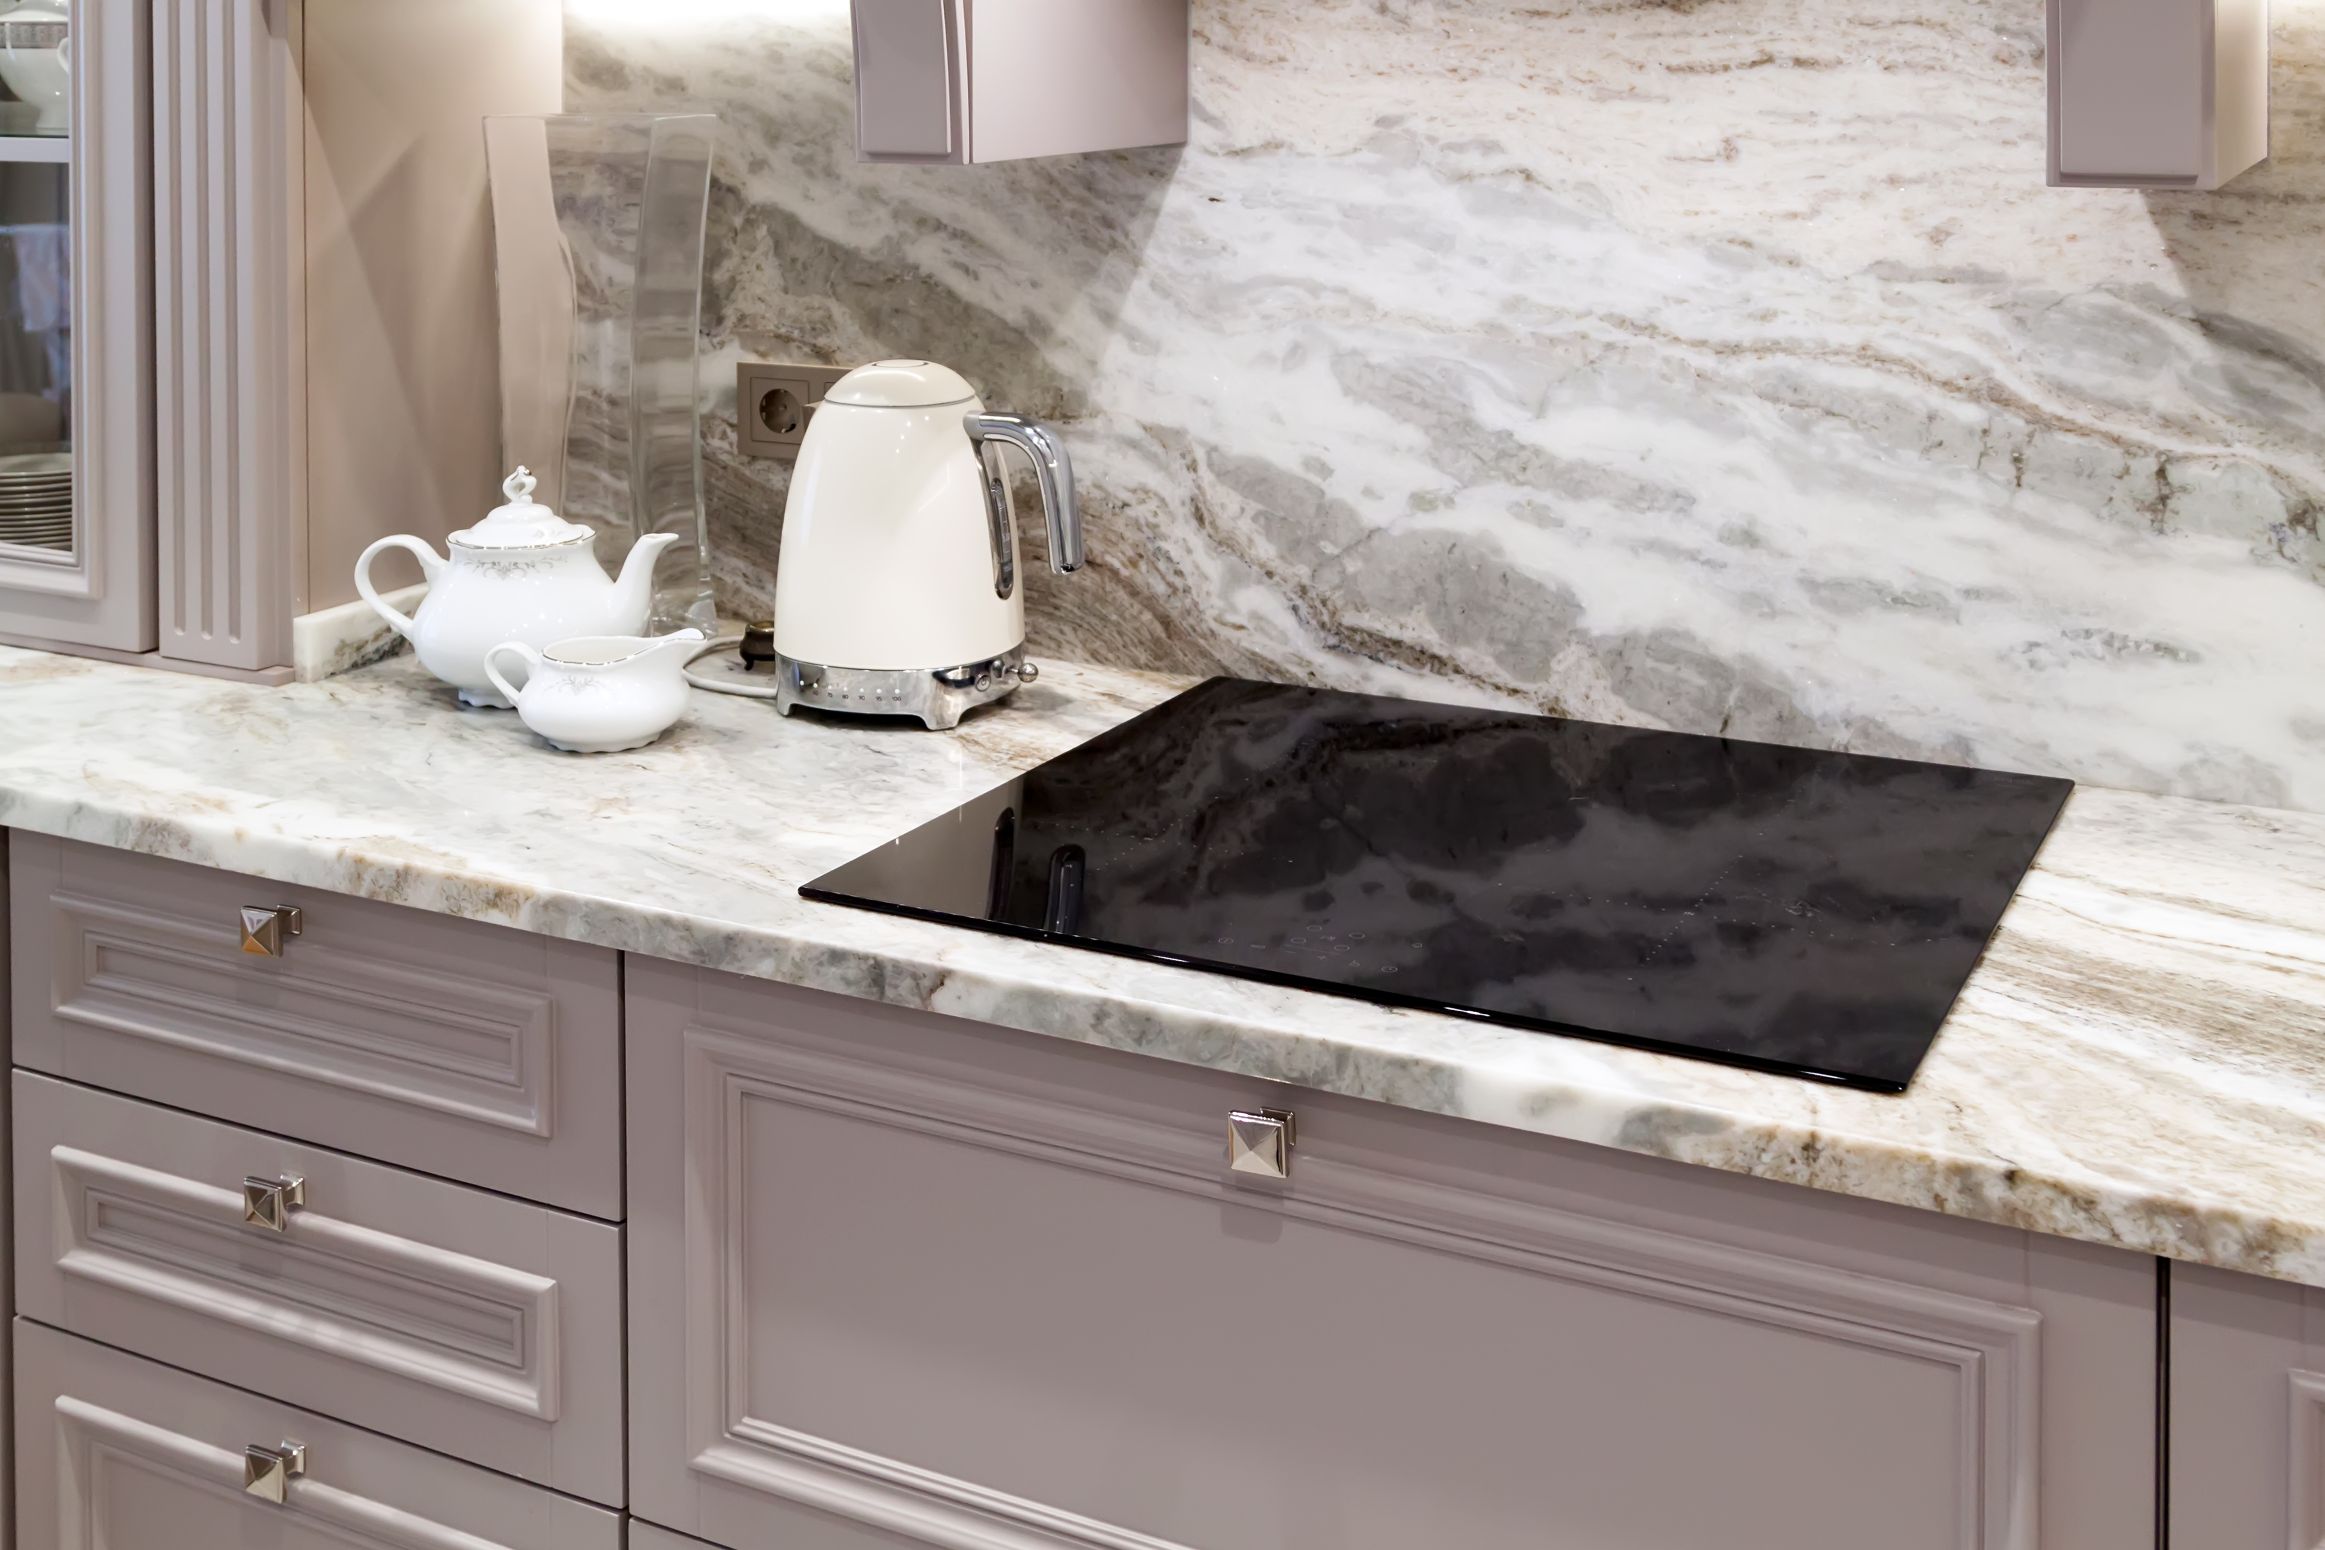 How to Polish Marble Countertops